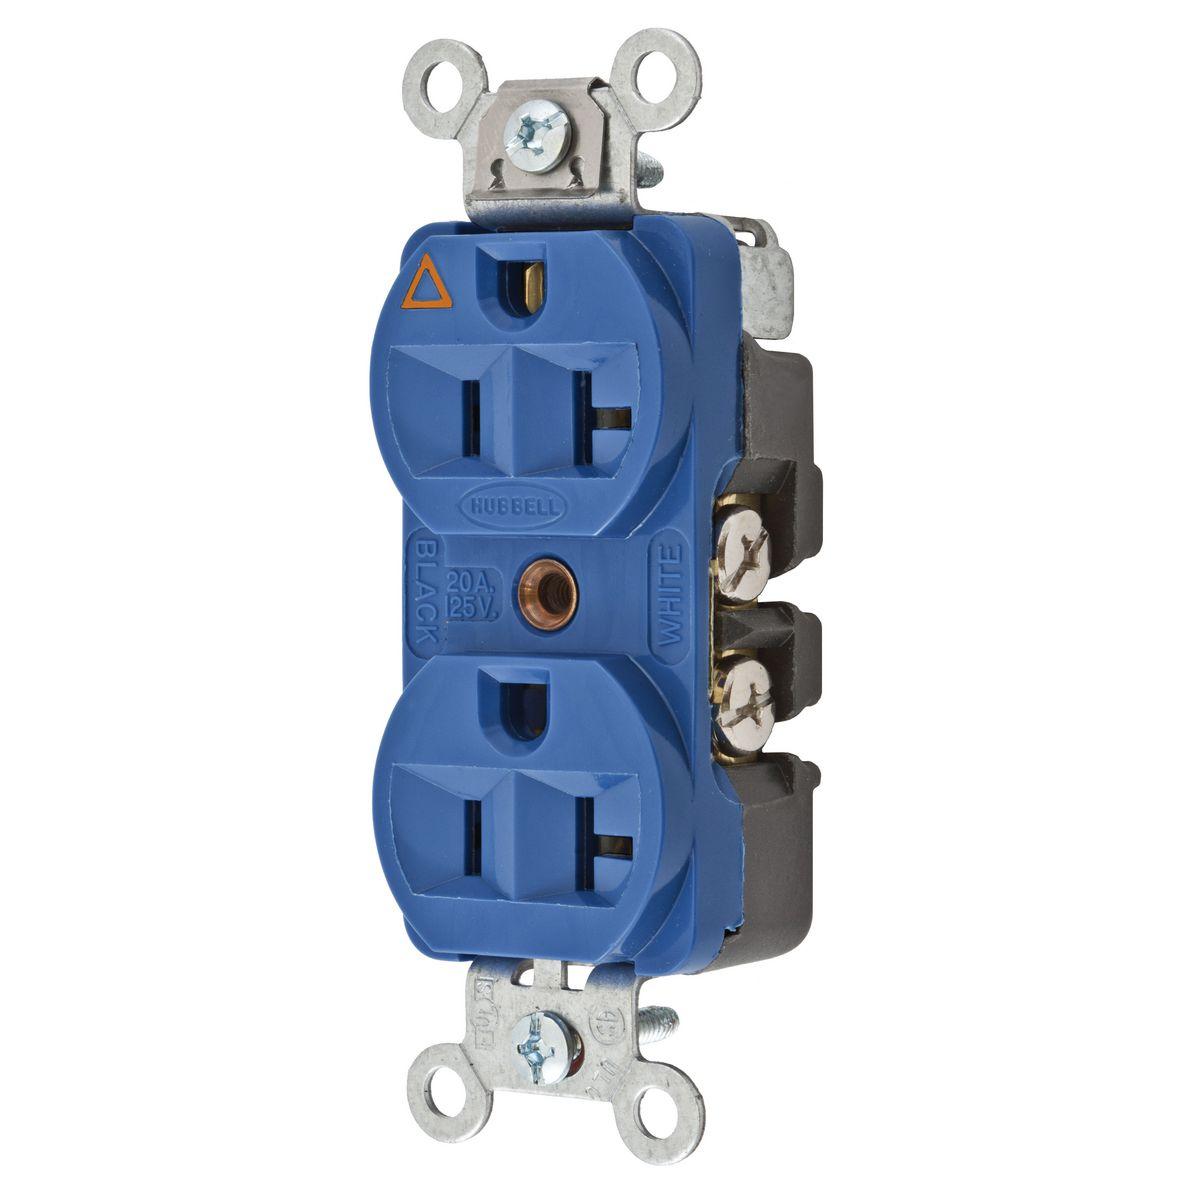 Hubbell CR5352IGBL Straight Blade Devices, Receptacles, Duplex, Hubbell-Pro Heavy Duty, 2-Pole 3-Wire Grounding, 20A 125V, 5-20R, Blue, Single Pack, Isolated Ground.  ; Triangle marking on face indicates isolated ground ; Slender/compact design ; Finder Groove Face ; Isolat